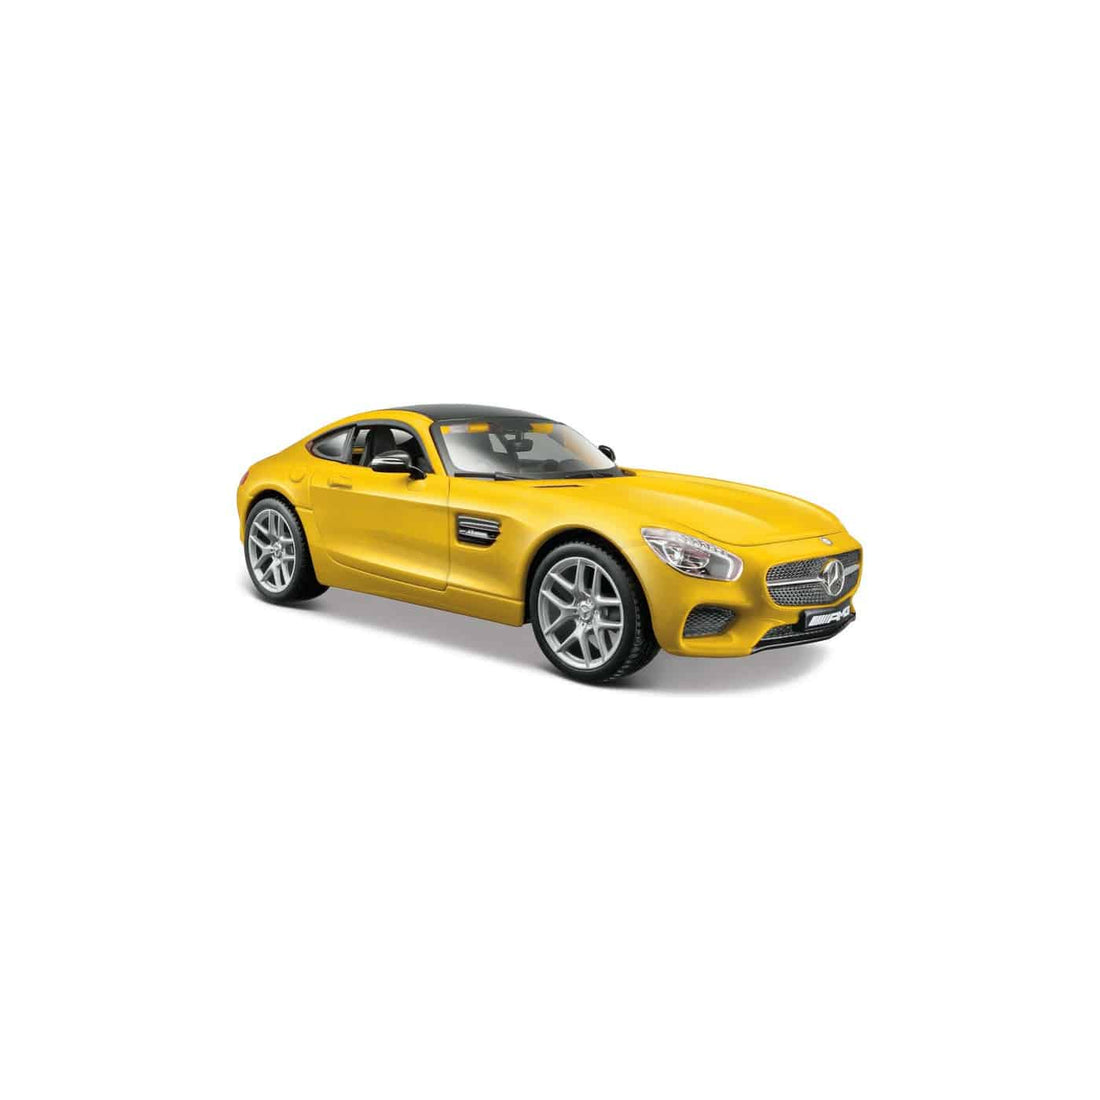 Maisto Special Edition 1:24 Mercedes Amg Gt Yellow